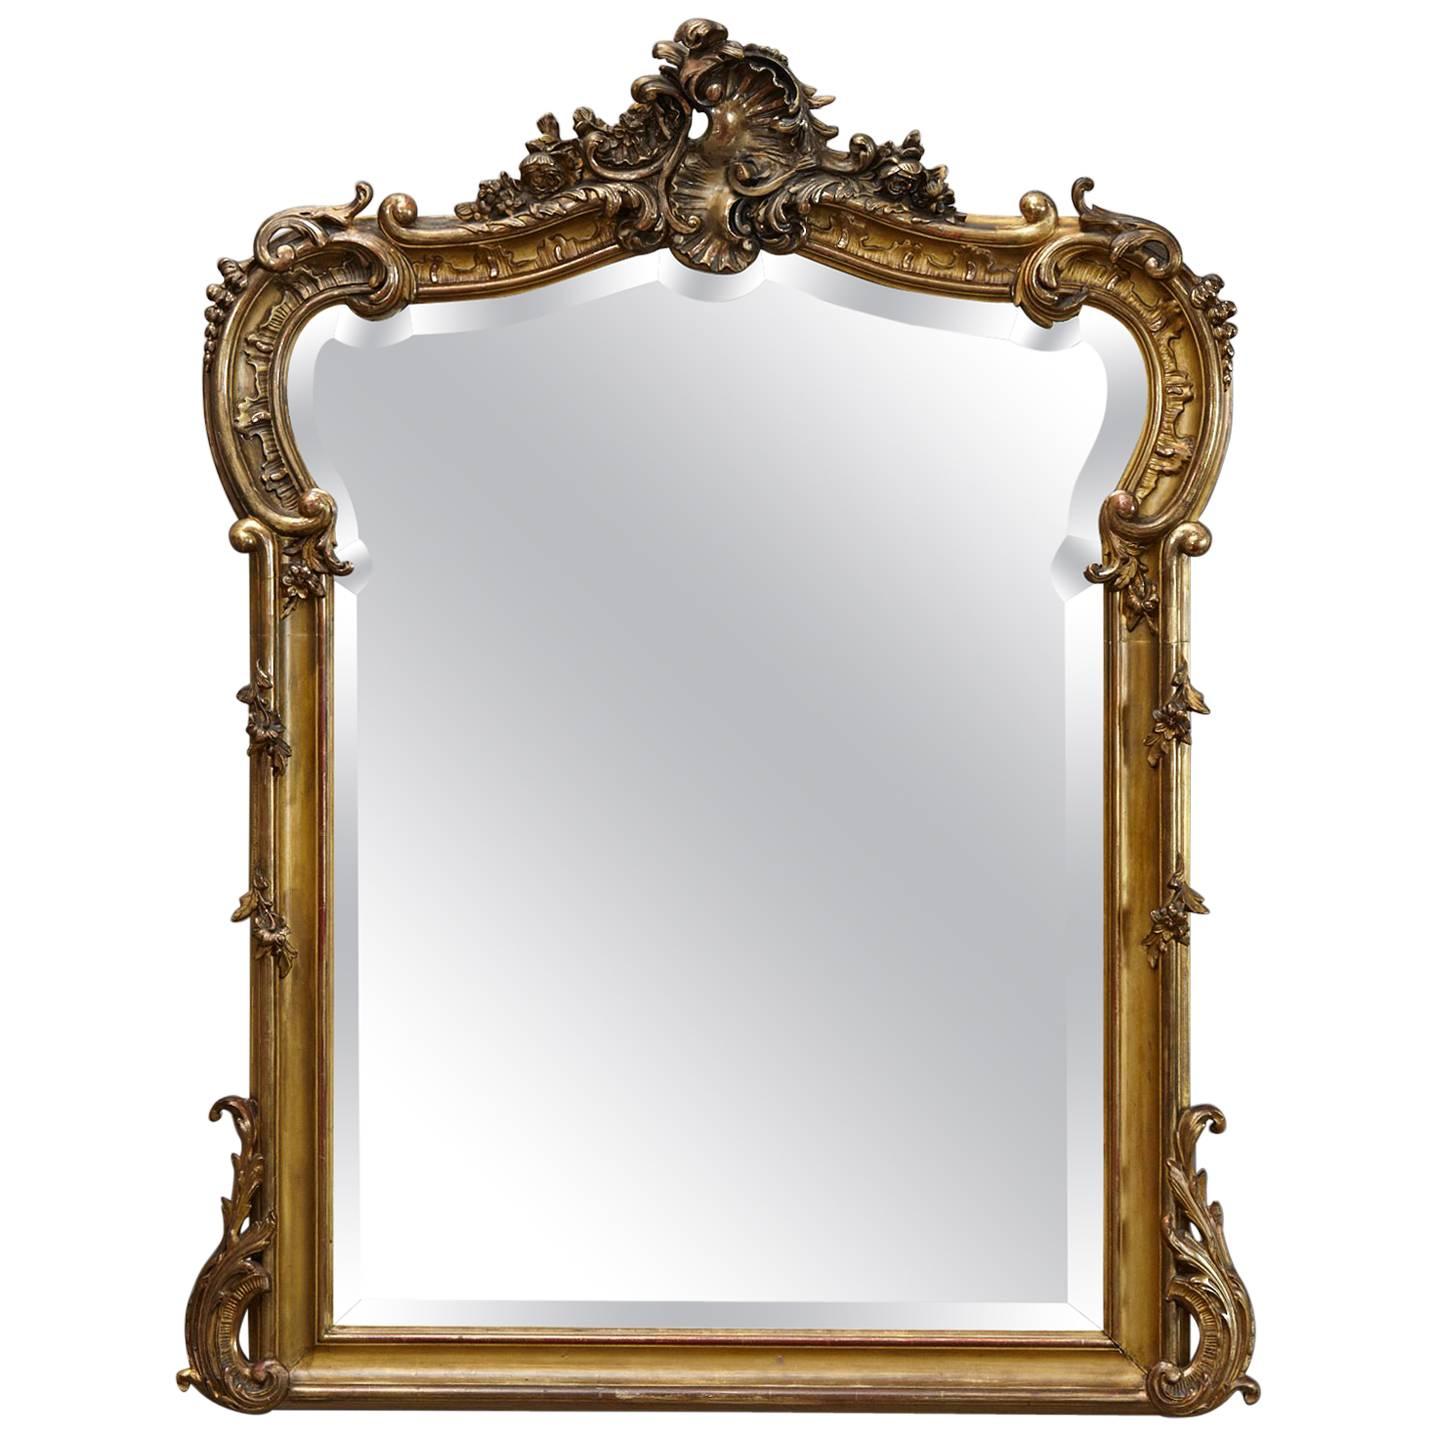 19th Century French Rococo Mirror with Beveled Glass